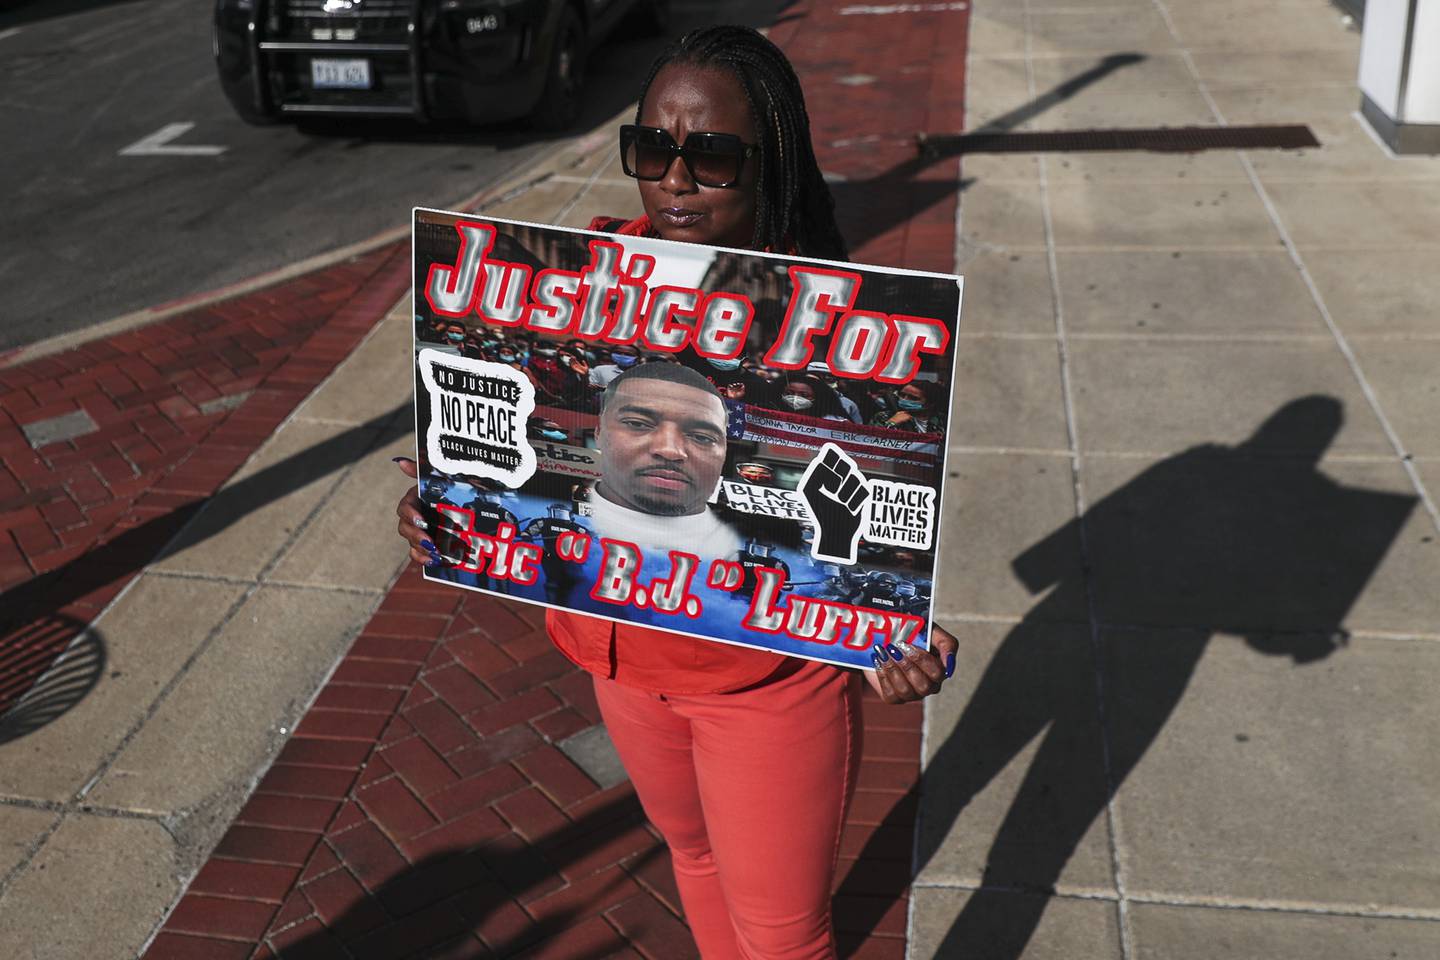 Nicole Lurry holds a sign calling for further investigation into the death of her husband Eric Lurry, a Joliet resident who died while in police custody, on Friday, Sept. 17, 2021, outside of the District Attorney's Office in Joliet, Ill.